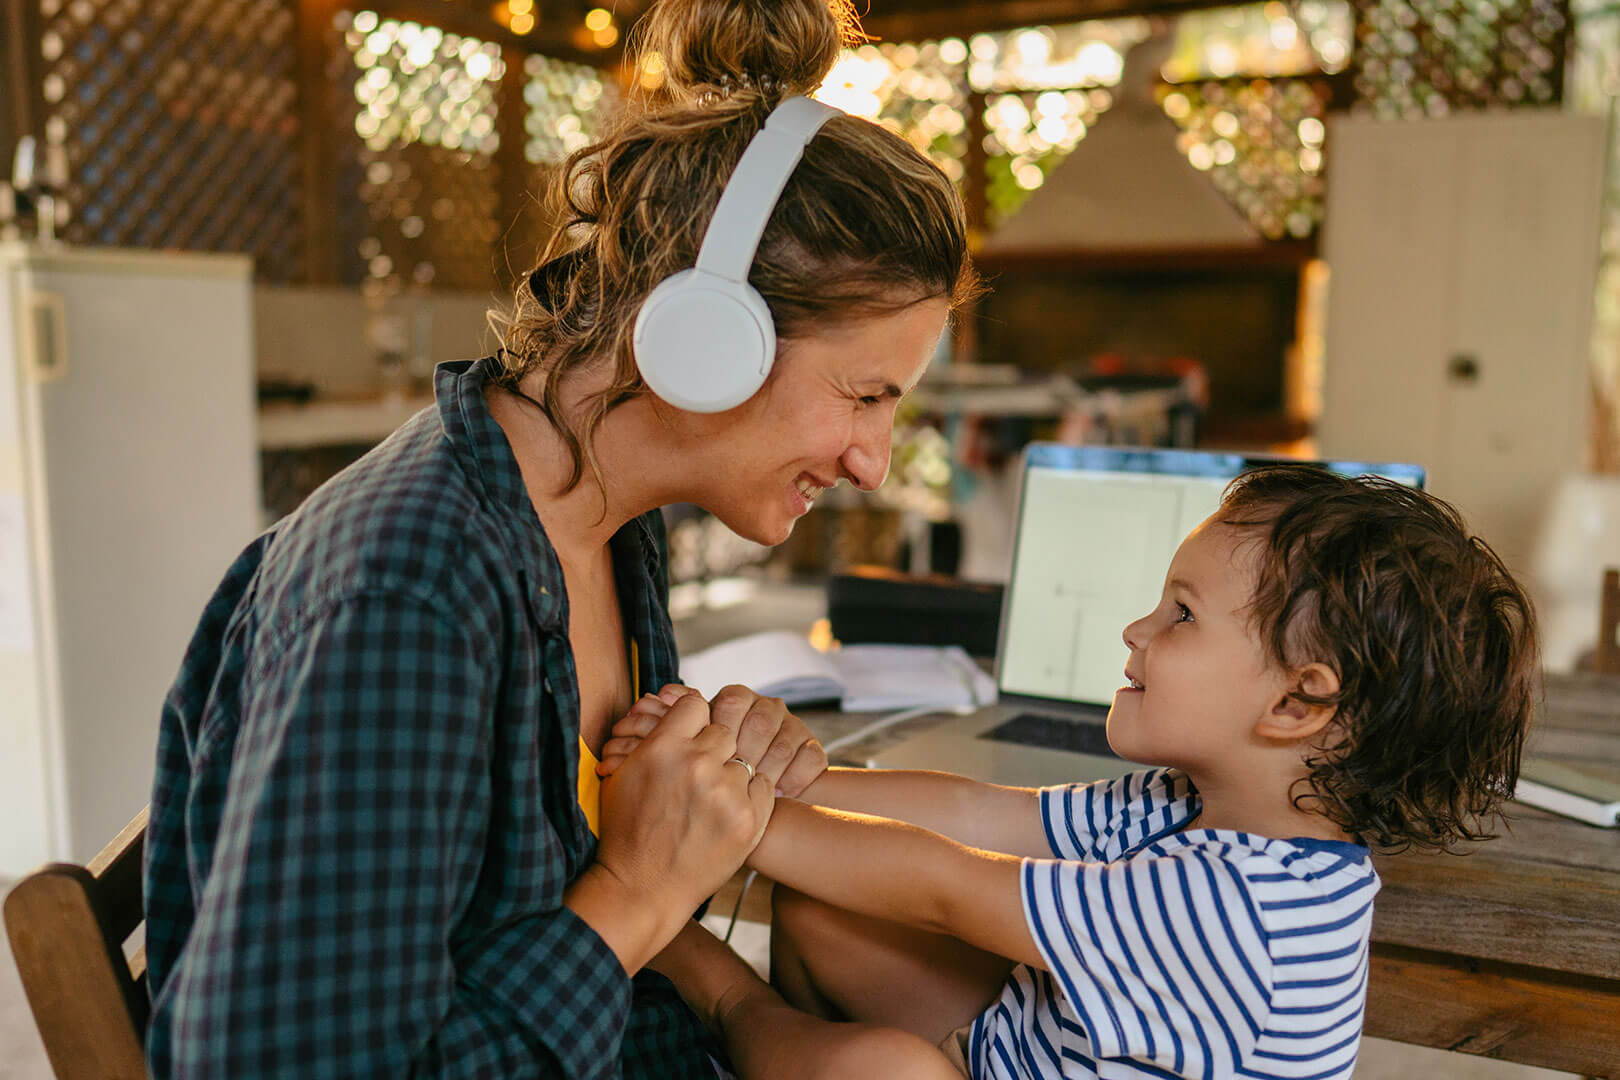 photograph of woman wearing headphones smiling and holding hands face to face with child in lap